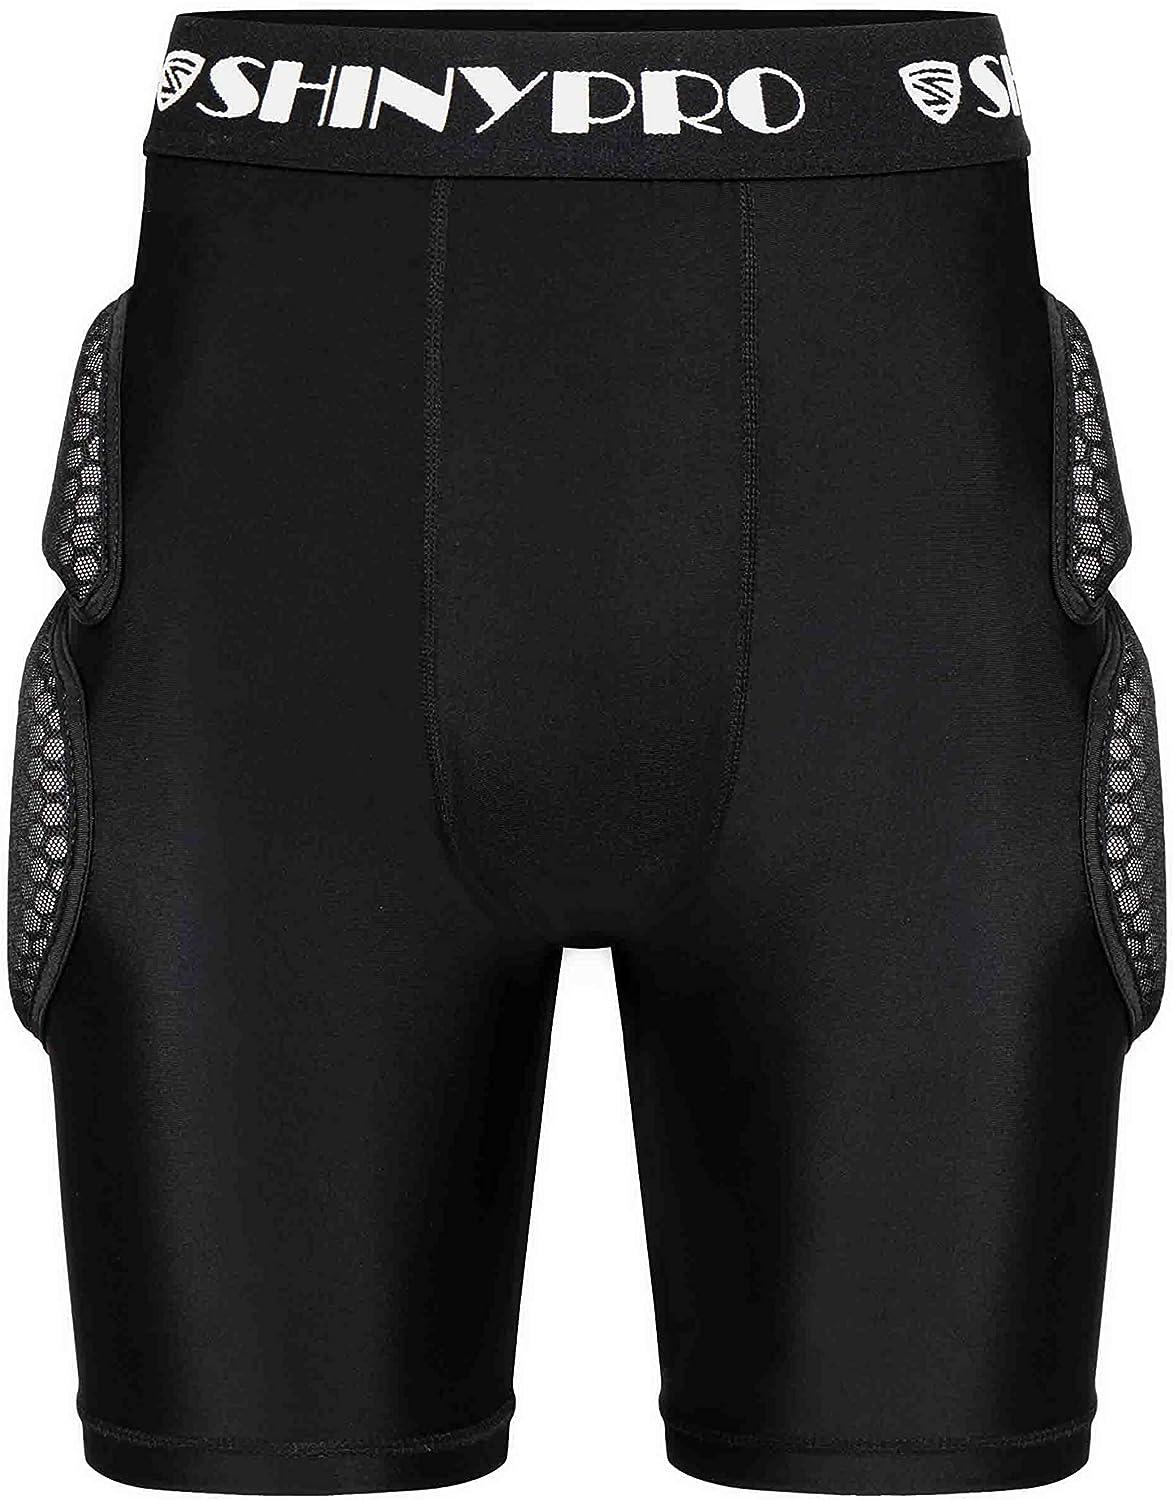 SHINYPRO Protective Padded Shorts for Snowboard and Skate,Overall